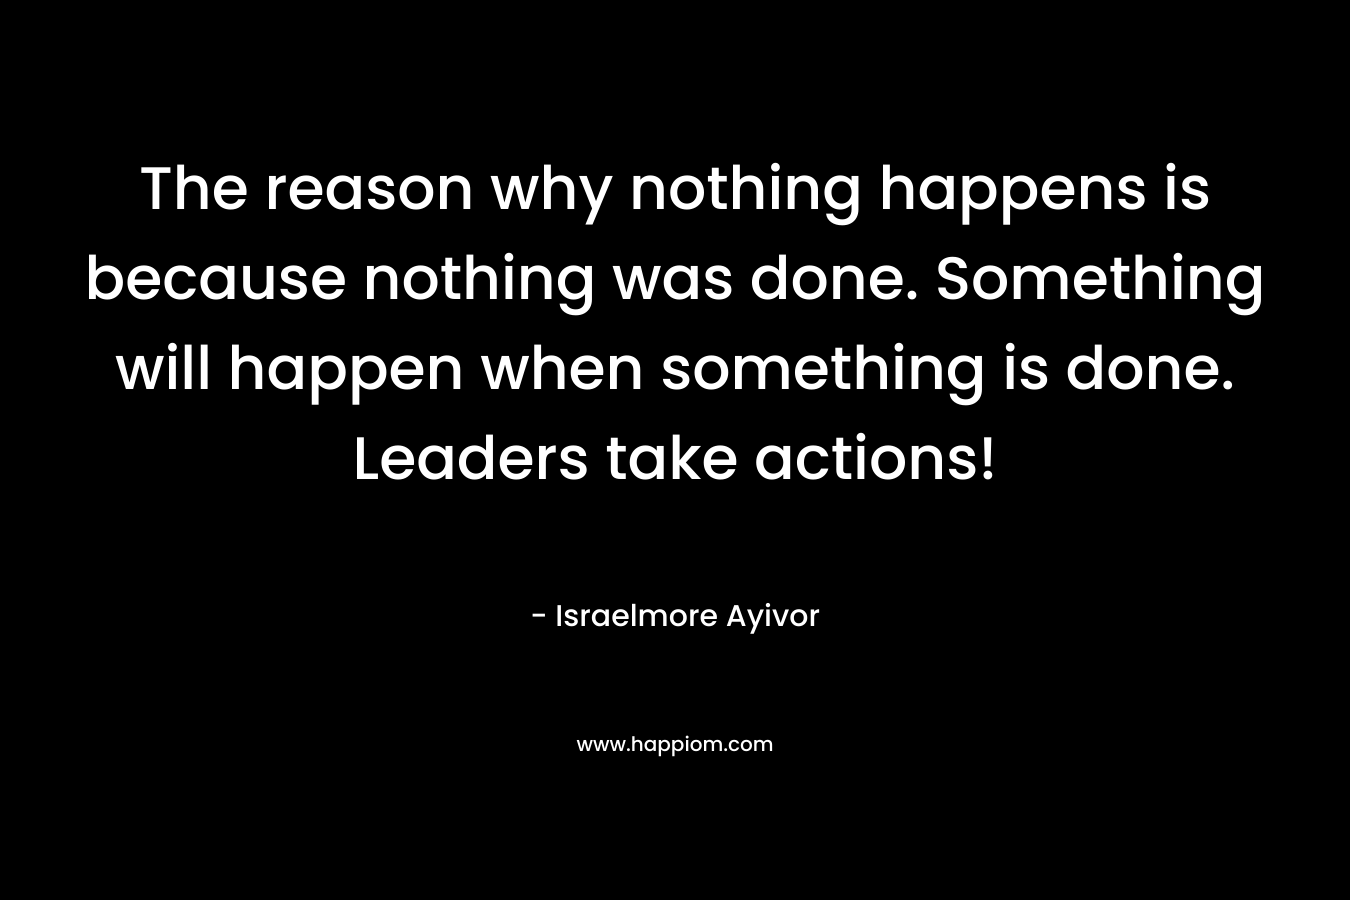 The reason why nothing happens is because nothing was done. Something will happen when something is done. Leaders take actions!